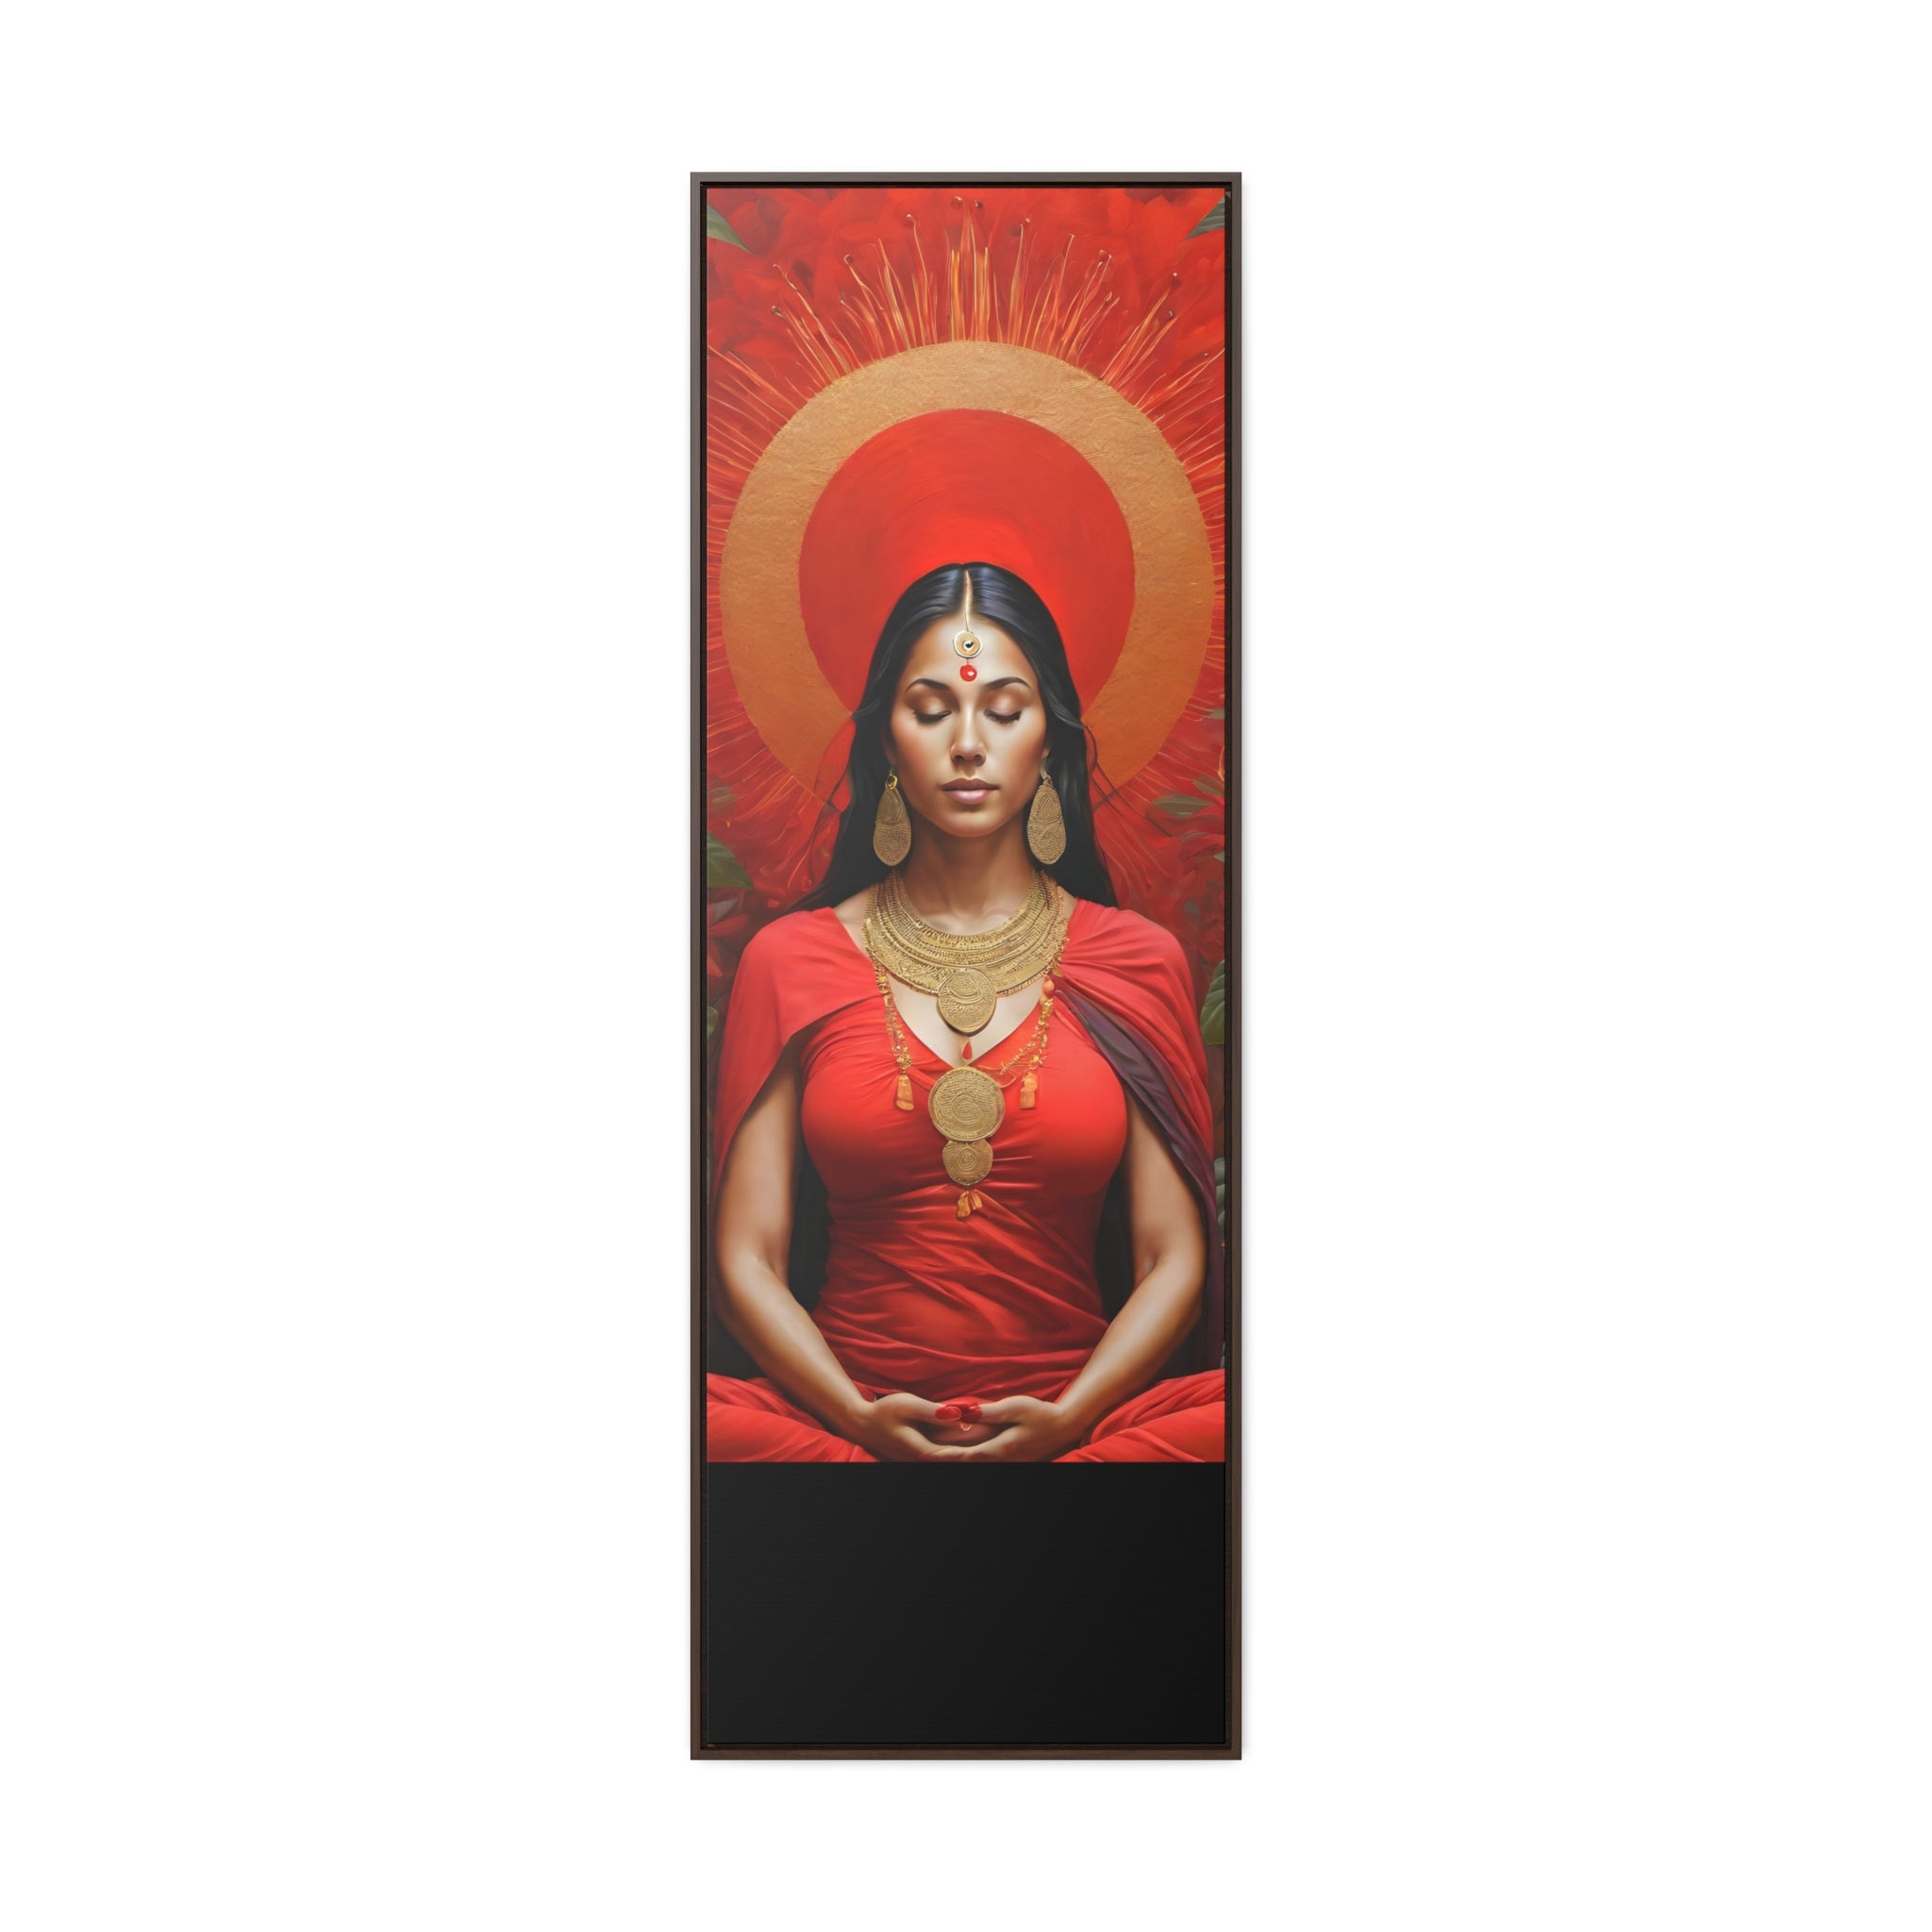 Ethereal Root Chakra Meditation - Gallery Canvas Wraps, Vertical Frame